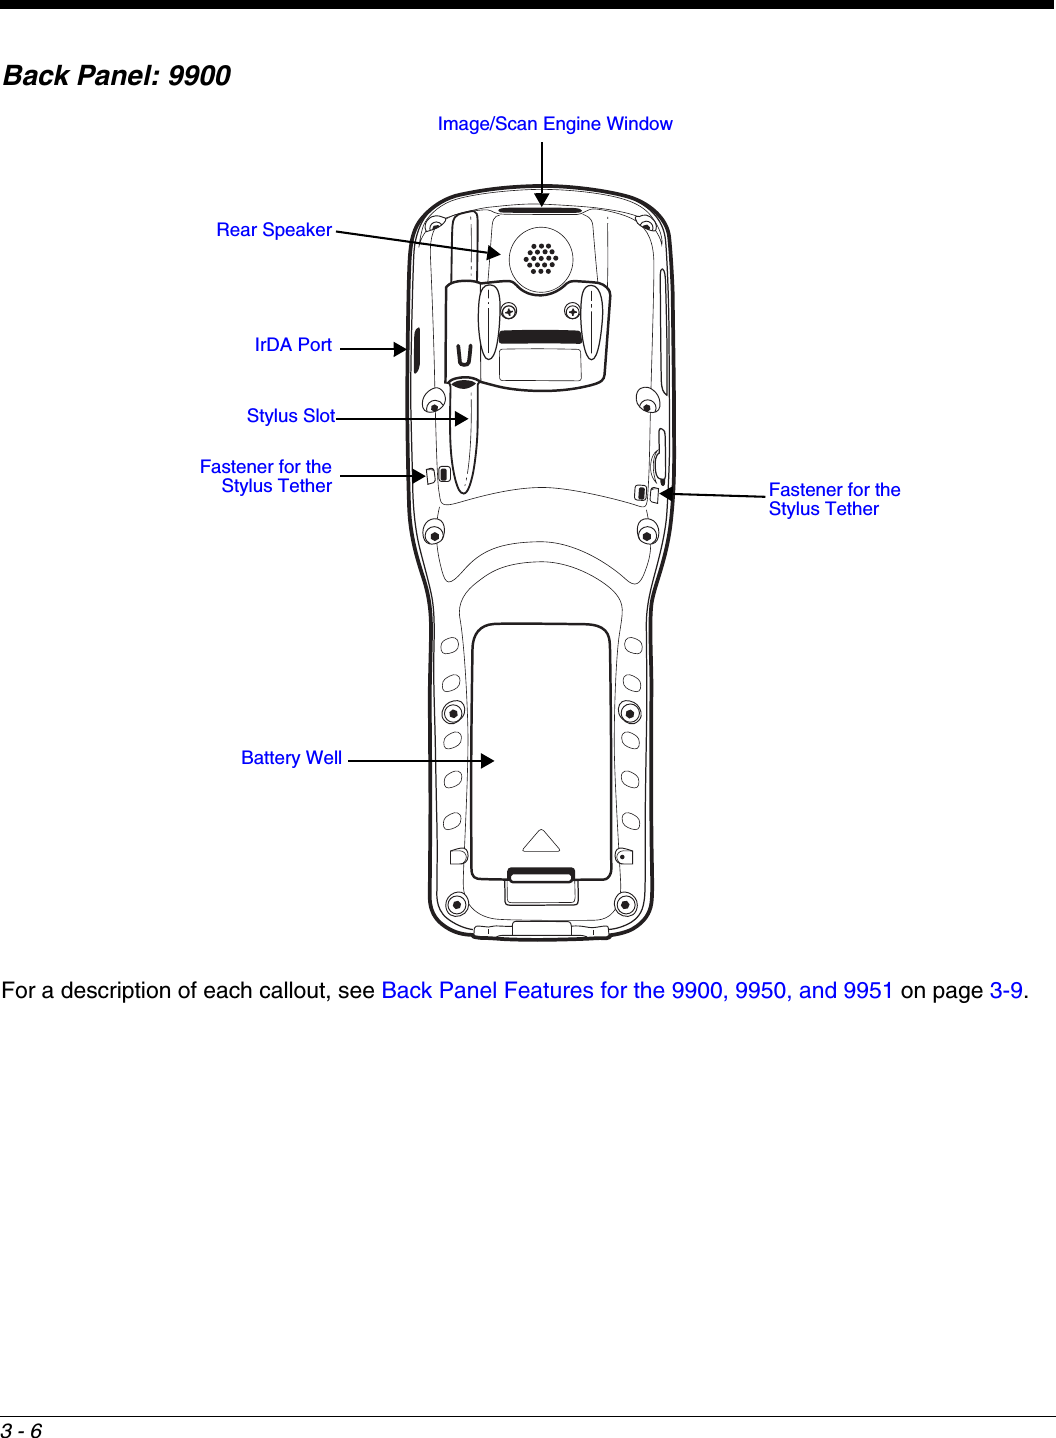 3 - 6Back Panel: 9900  For a description of each callout, see Back Panel Features for the 9900, 9950, and 9951 on page 3-9.Battery WellImage/Scan Engine Window Stylus SlotRear SpeakerFastener for the Stylus TetherIrDA PortFastener for the Stylus Tether